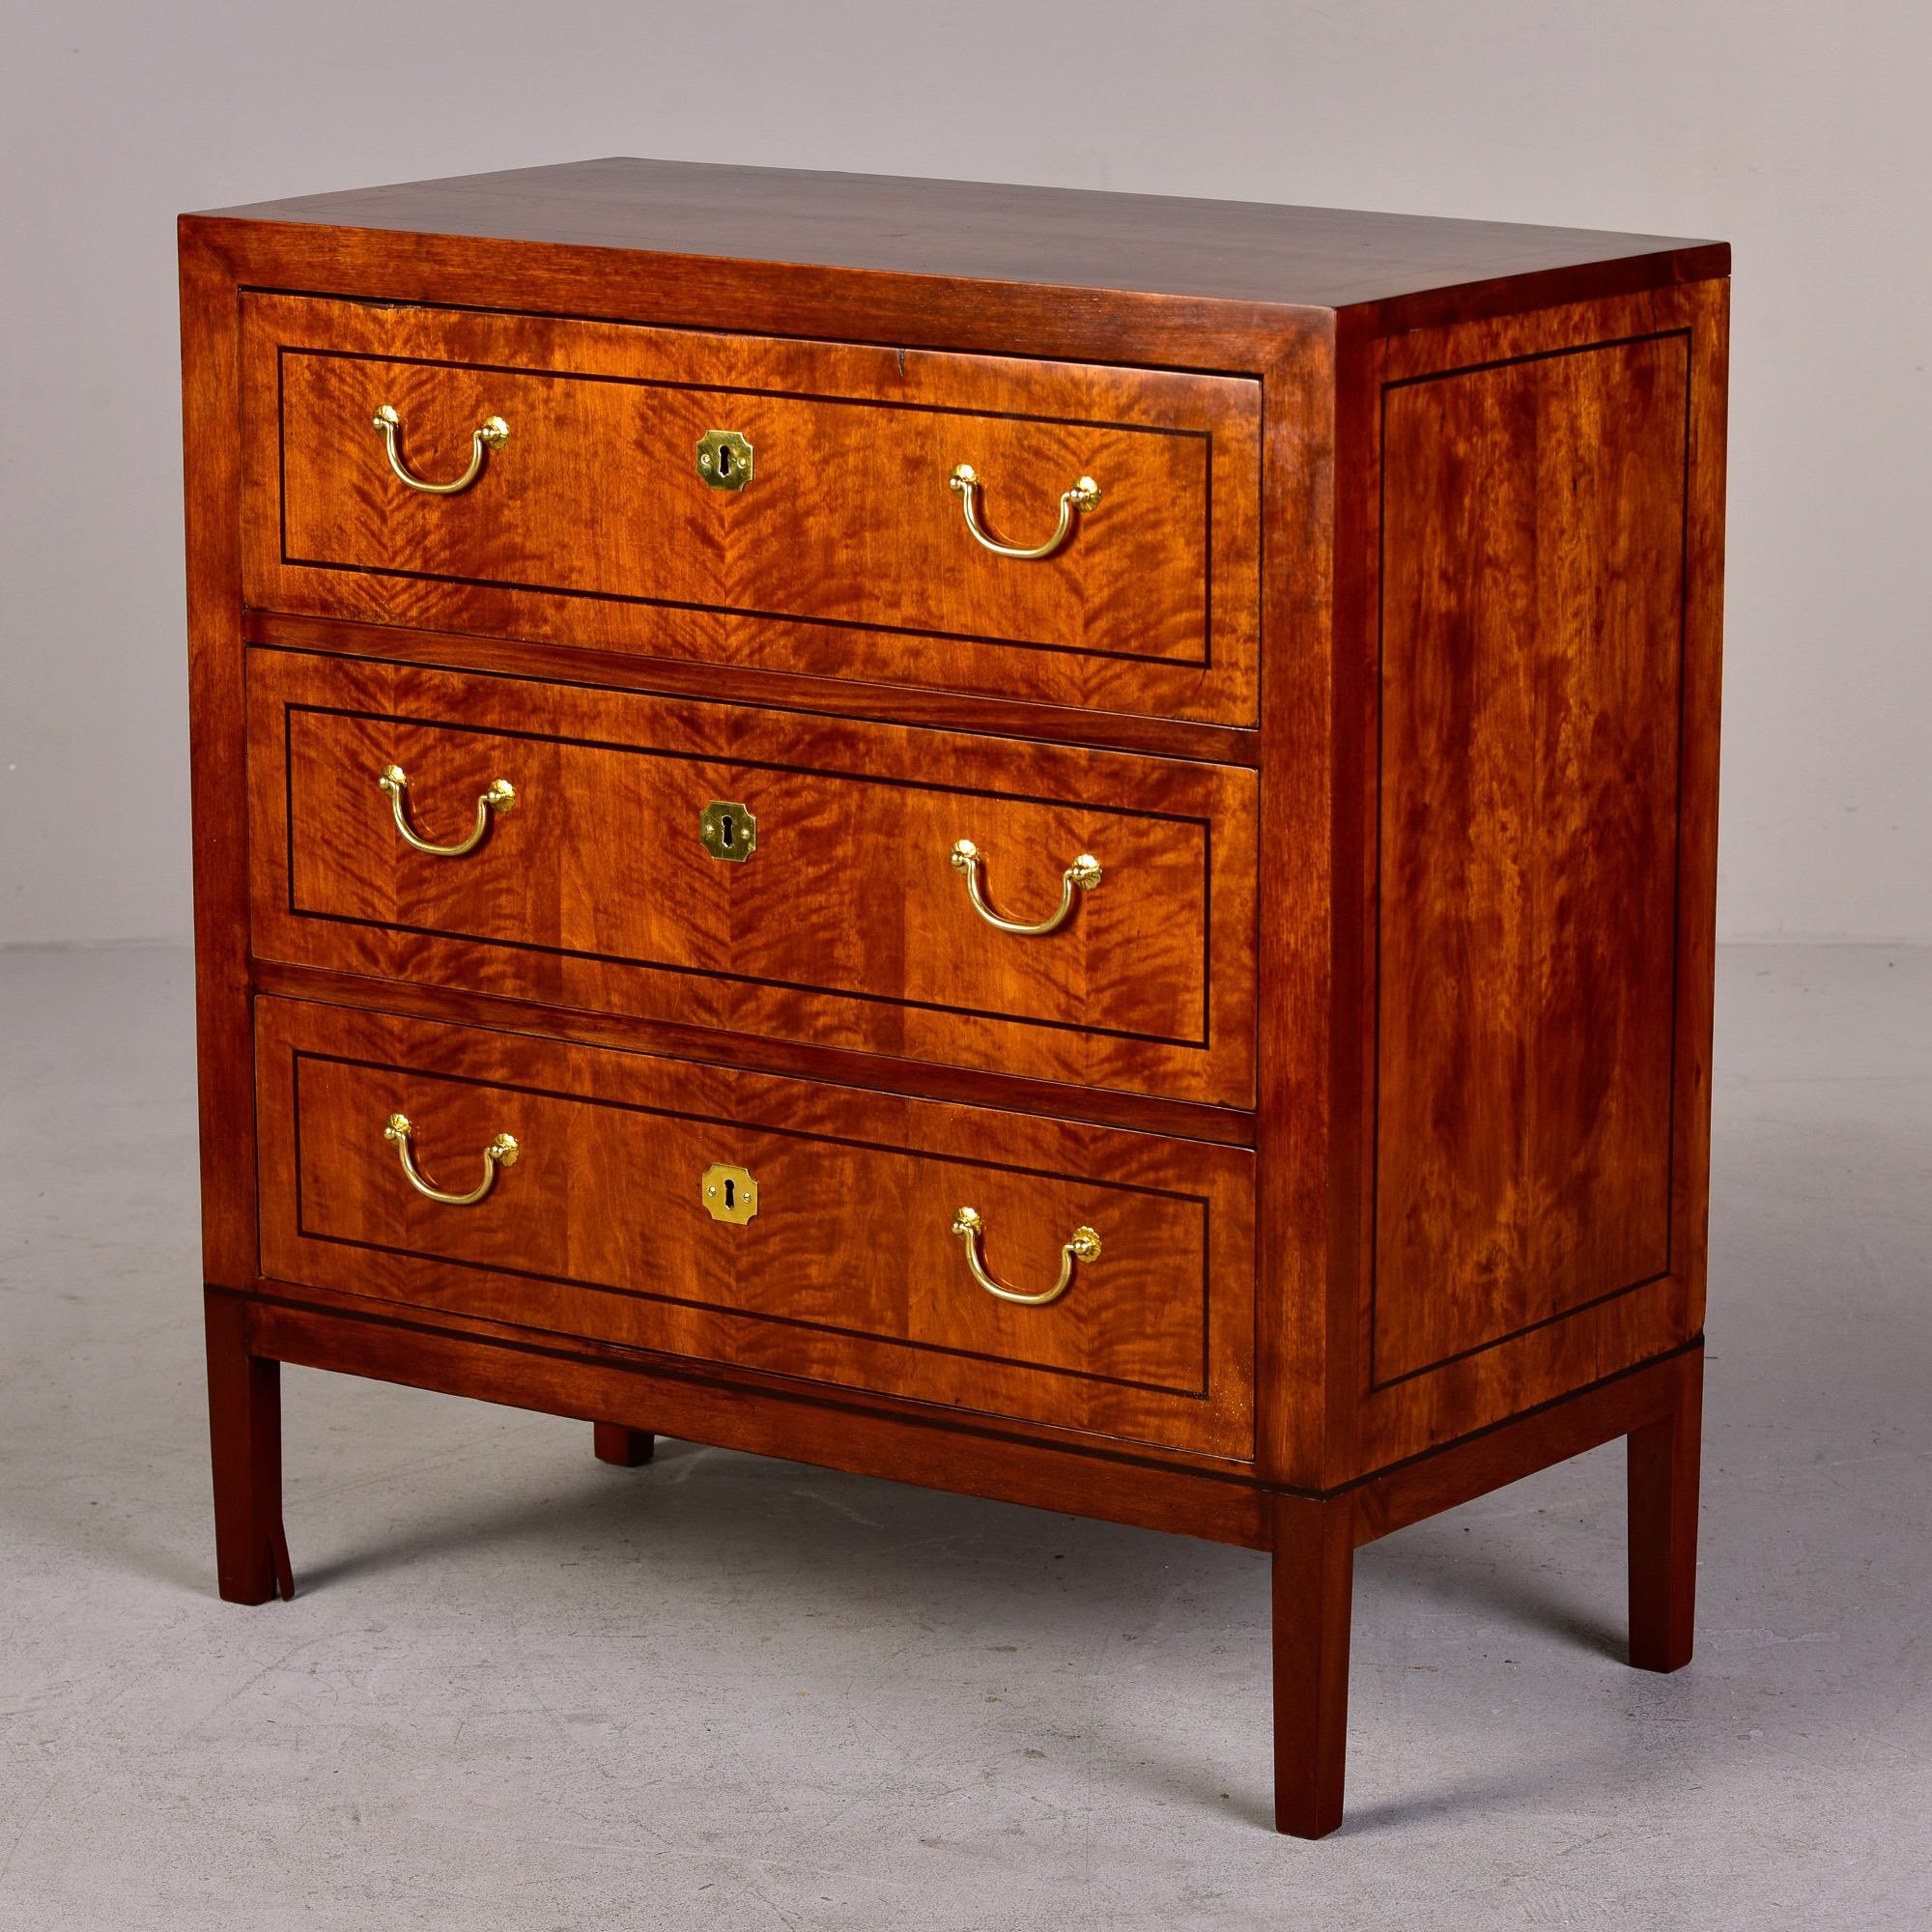 New and custom made for us in England by a family owned and operated cabinet maker. Three drawer chest in birch with classic brass hardware and functional locks. Nicely figured birch is accented with contrasting slender dark inlay border on top,